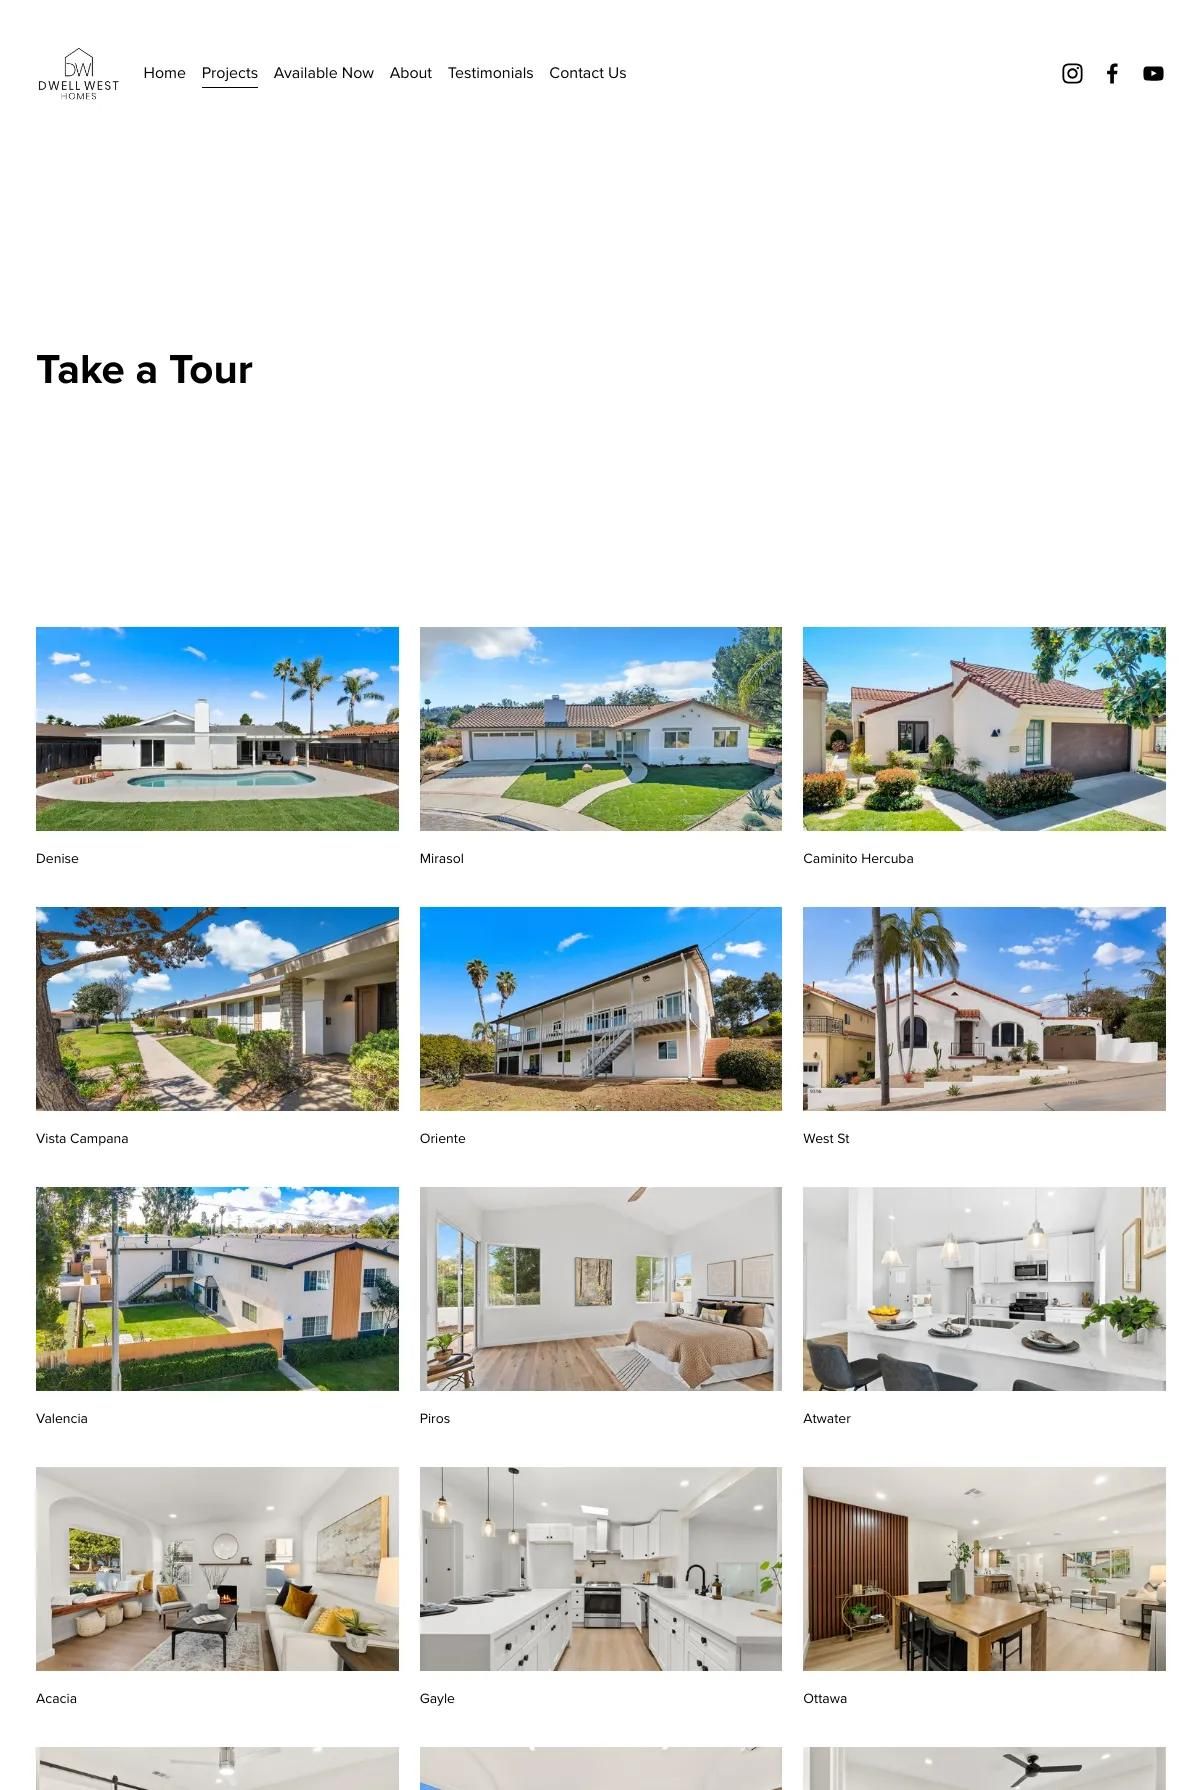 Screenshot 2 of Dwell West Homes (Example Squarespace Real Estate Website)